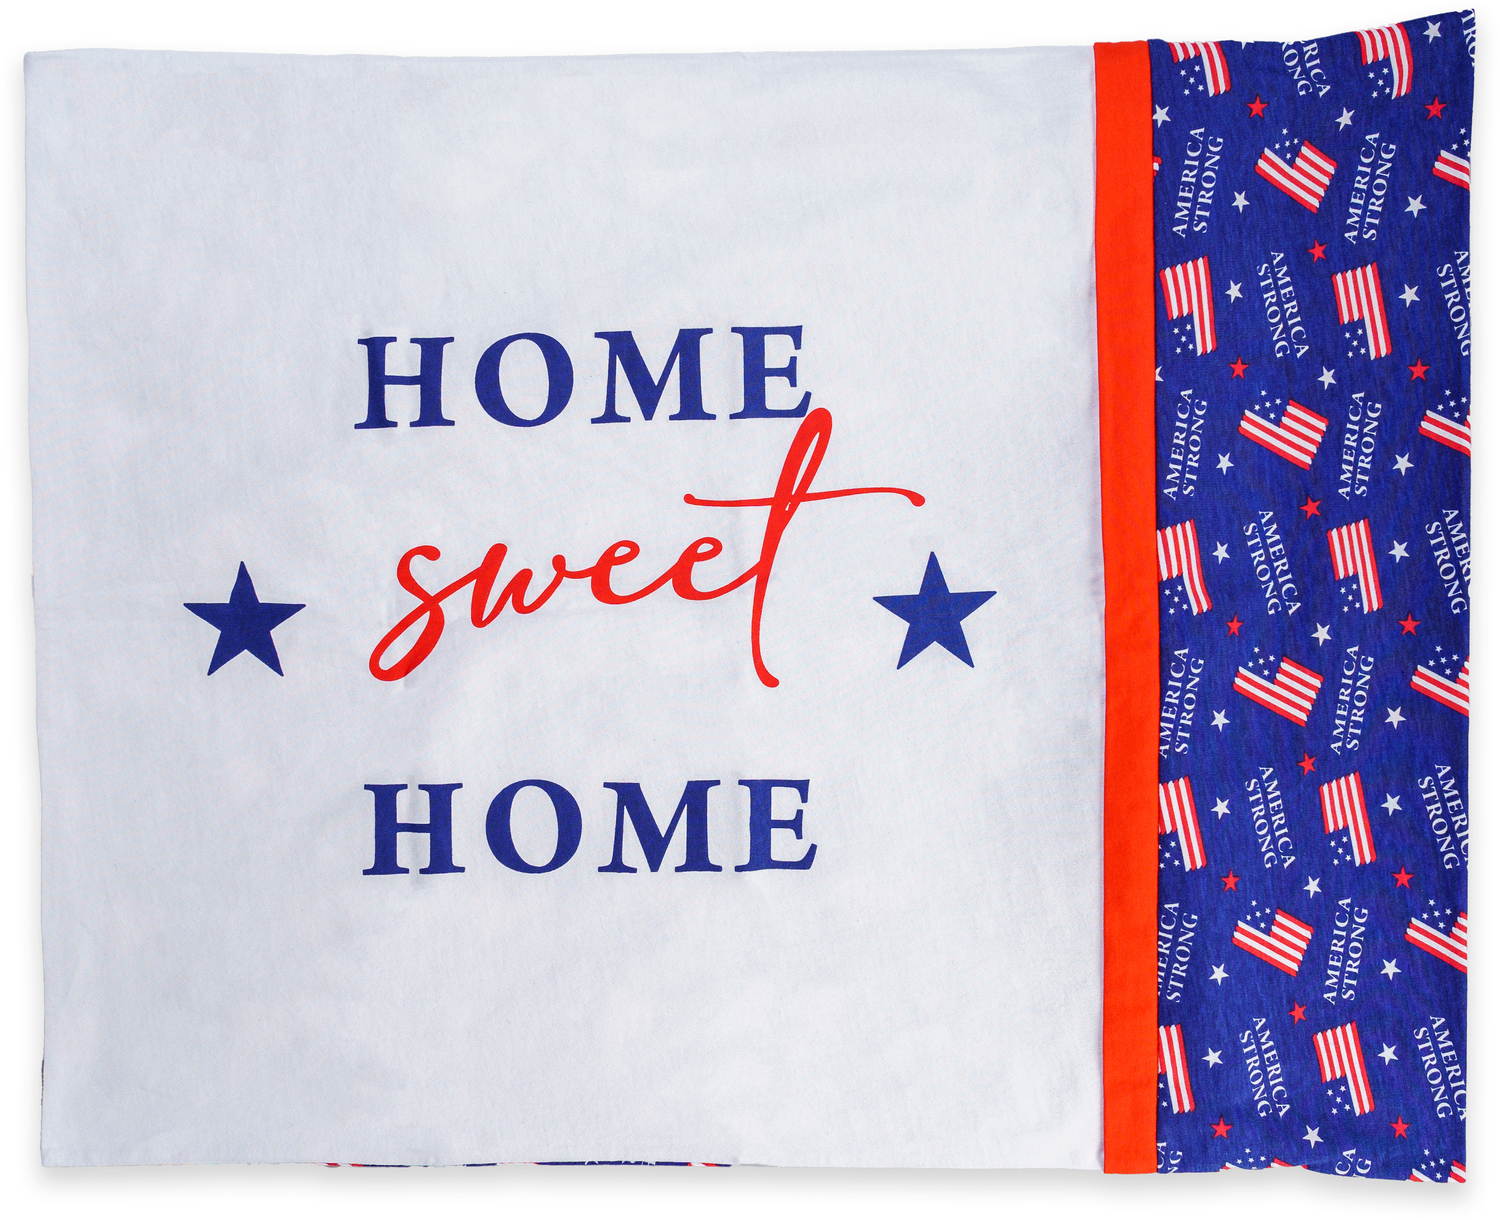 Home Sweet Home by Red, White, & Blue Crew - Home Sweet Home - 20" x 26" Pillowcase